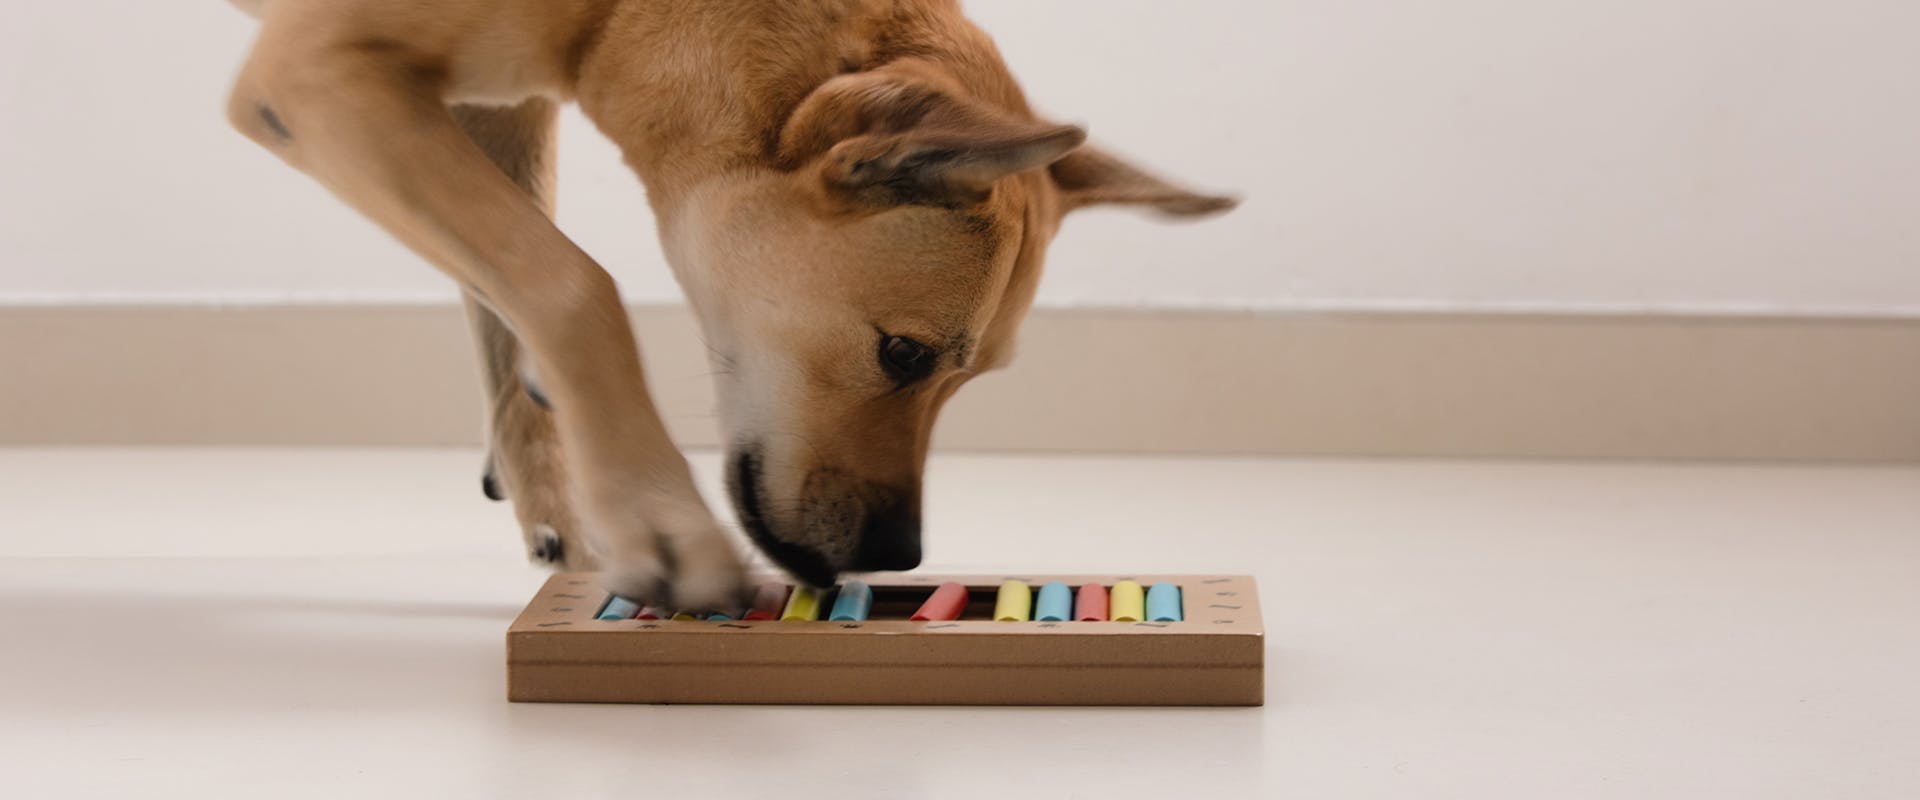 A dog playing with a dog treat dispenser toy